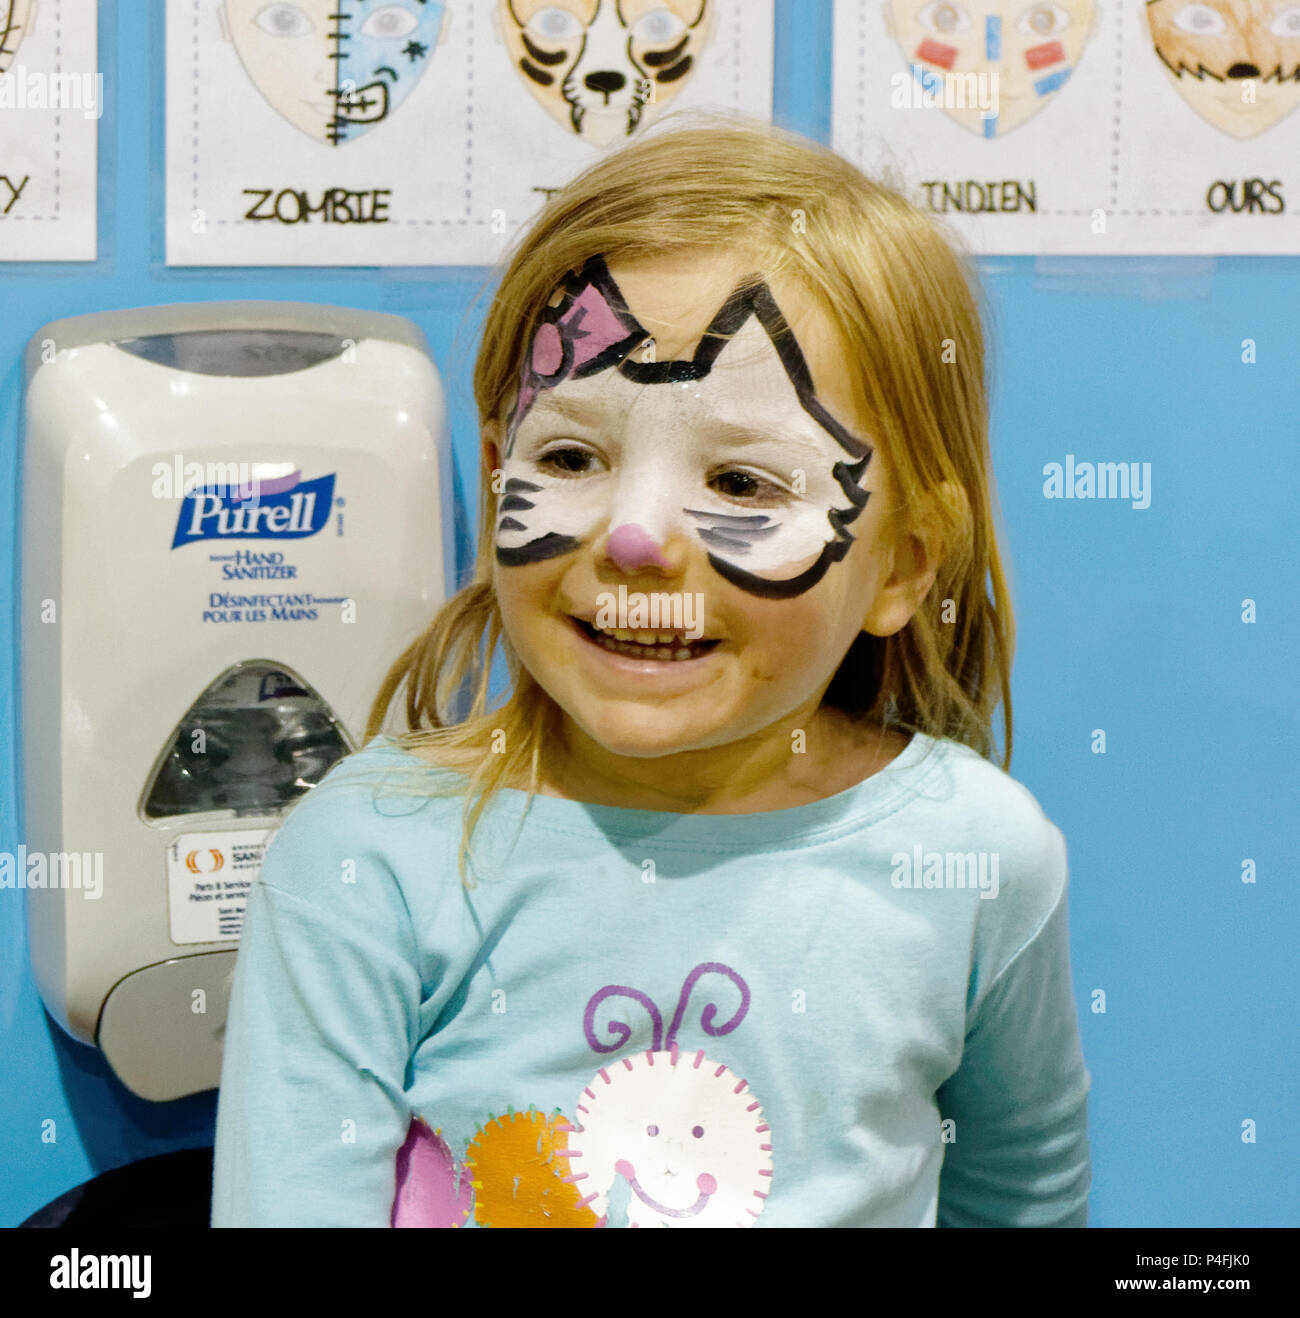 A three year old girl looking delighted with her new Hello Kitty face paint Stock Photo